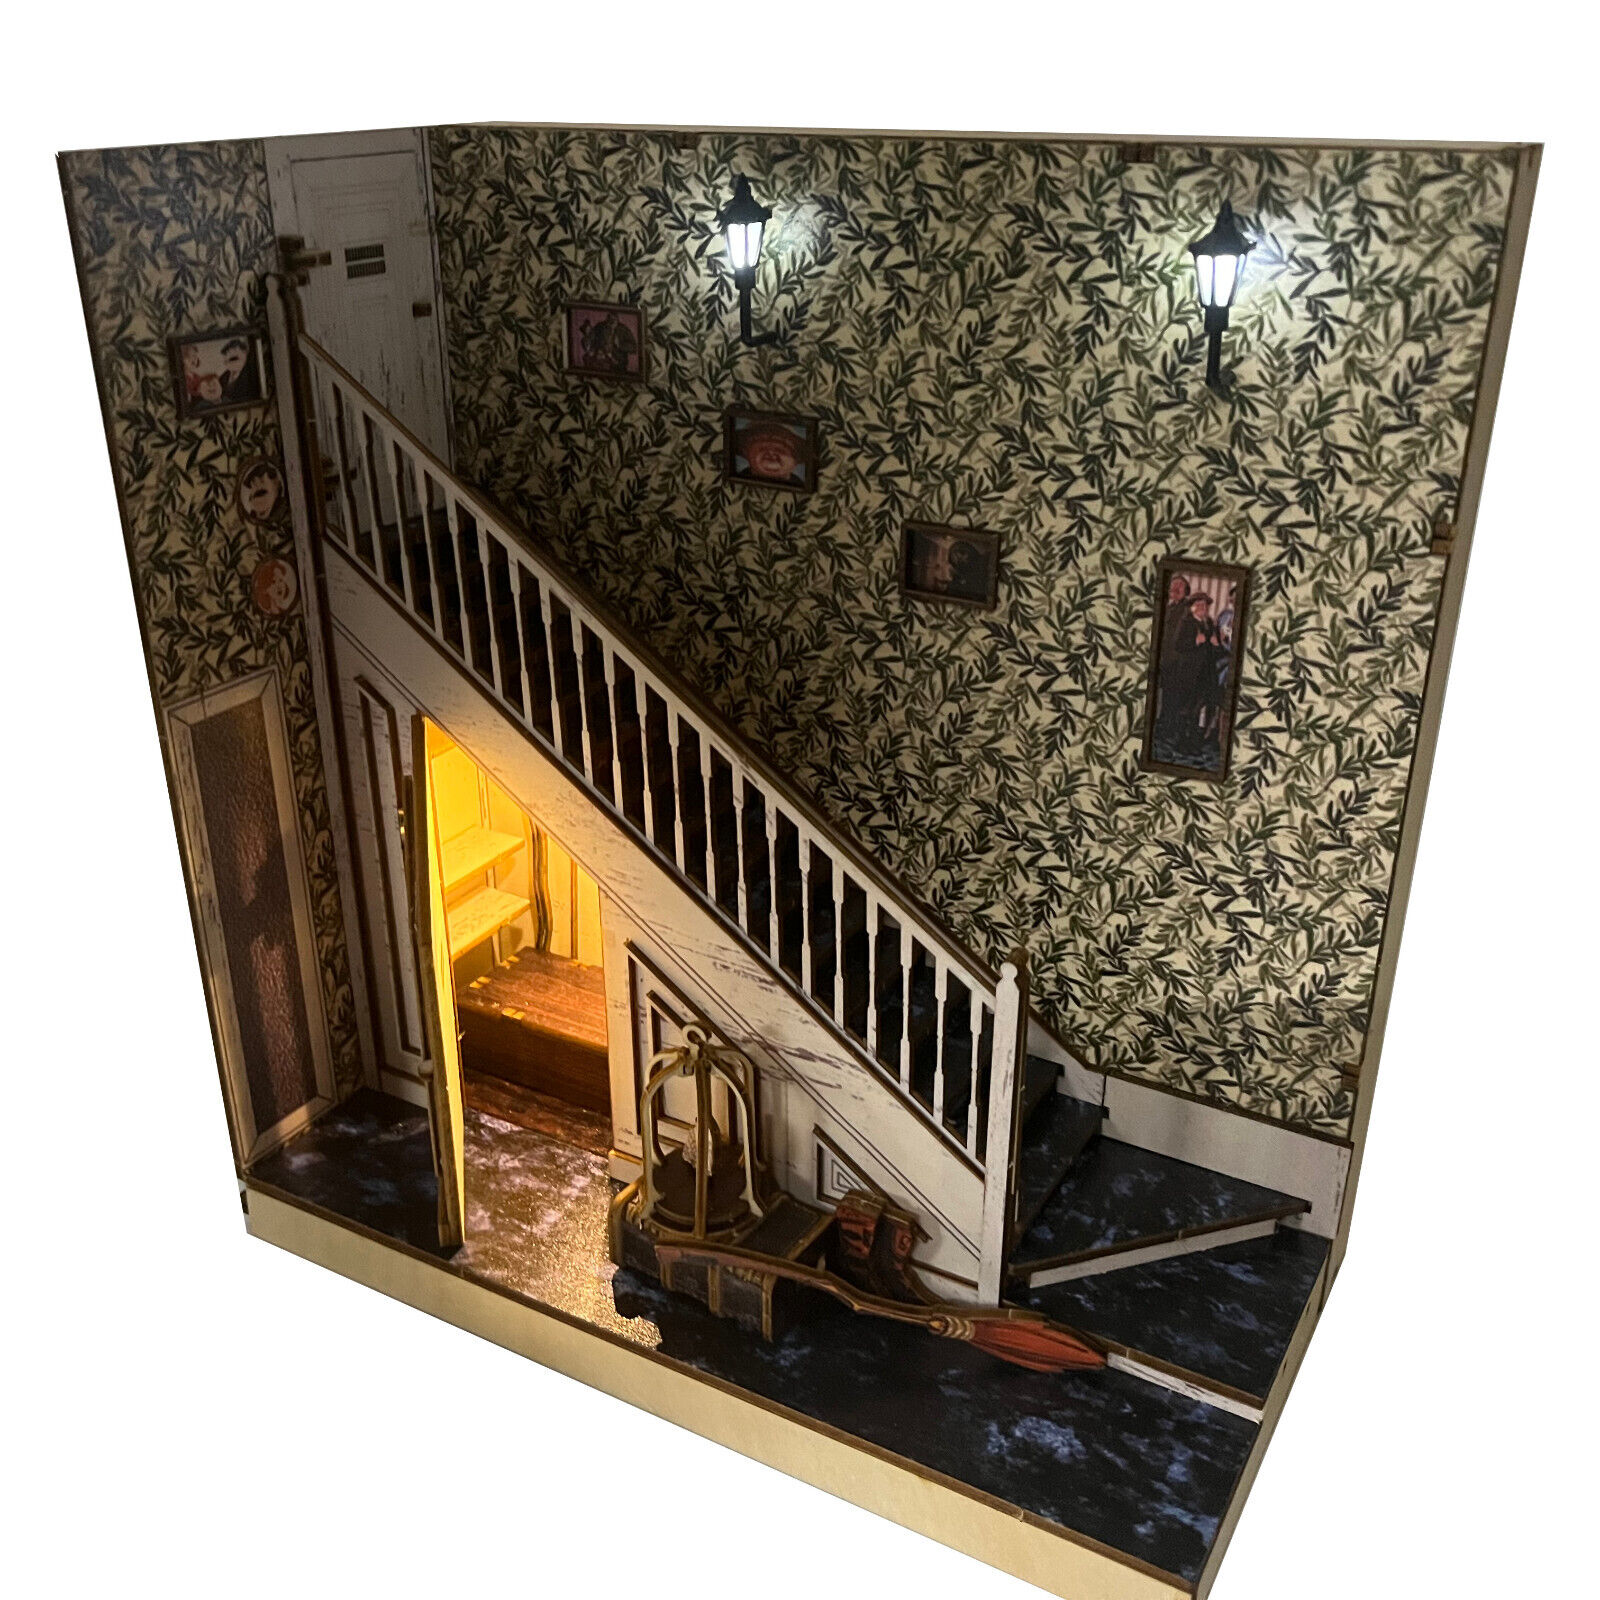 Cupboard Under The Stairs Themed Book Nook - Book Shelf Decor - Home Decor